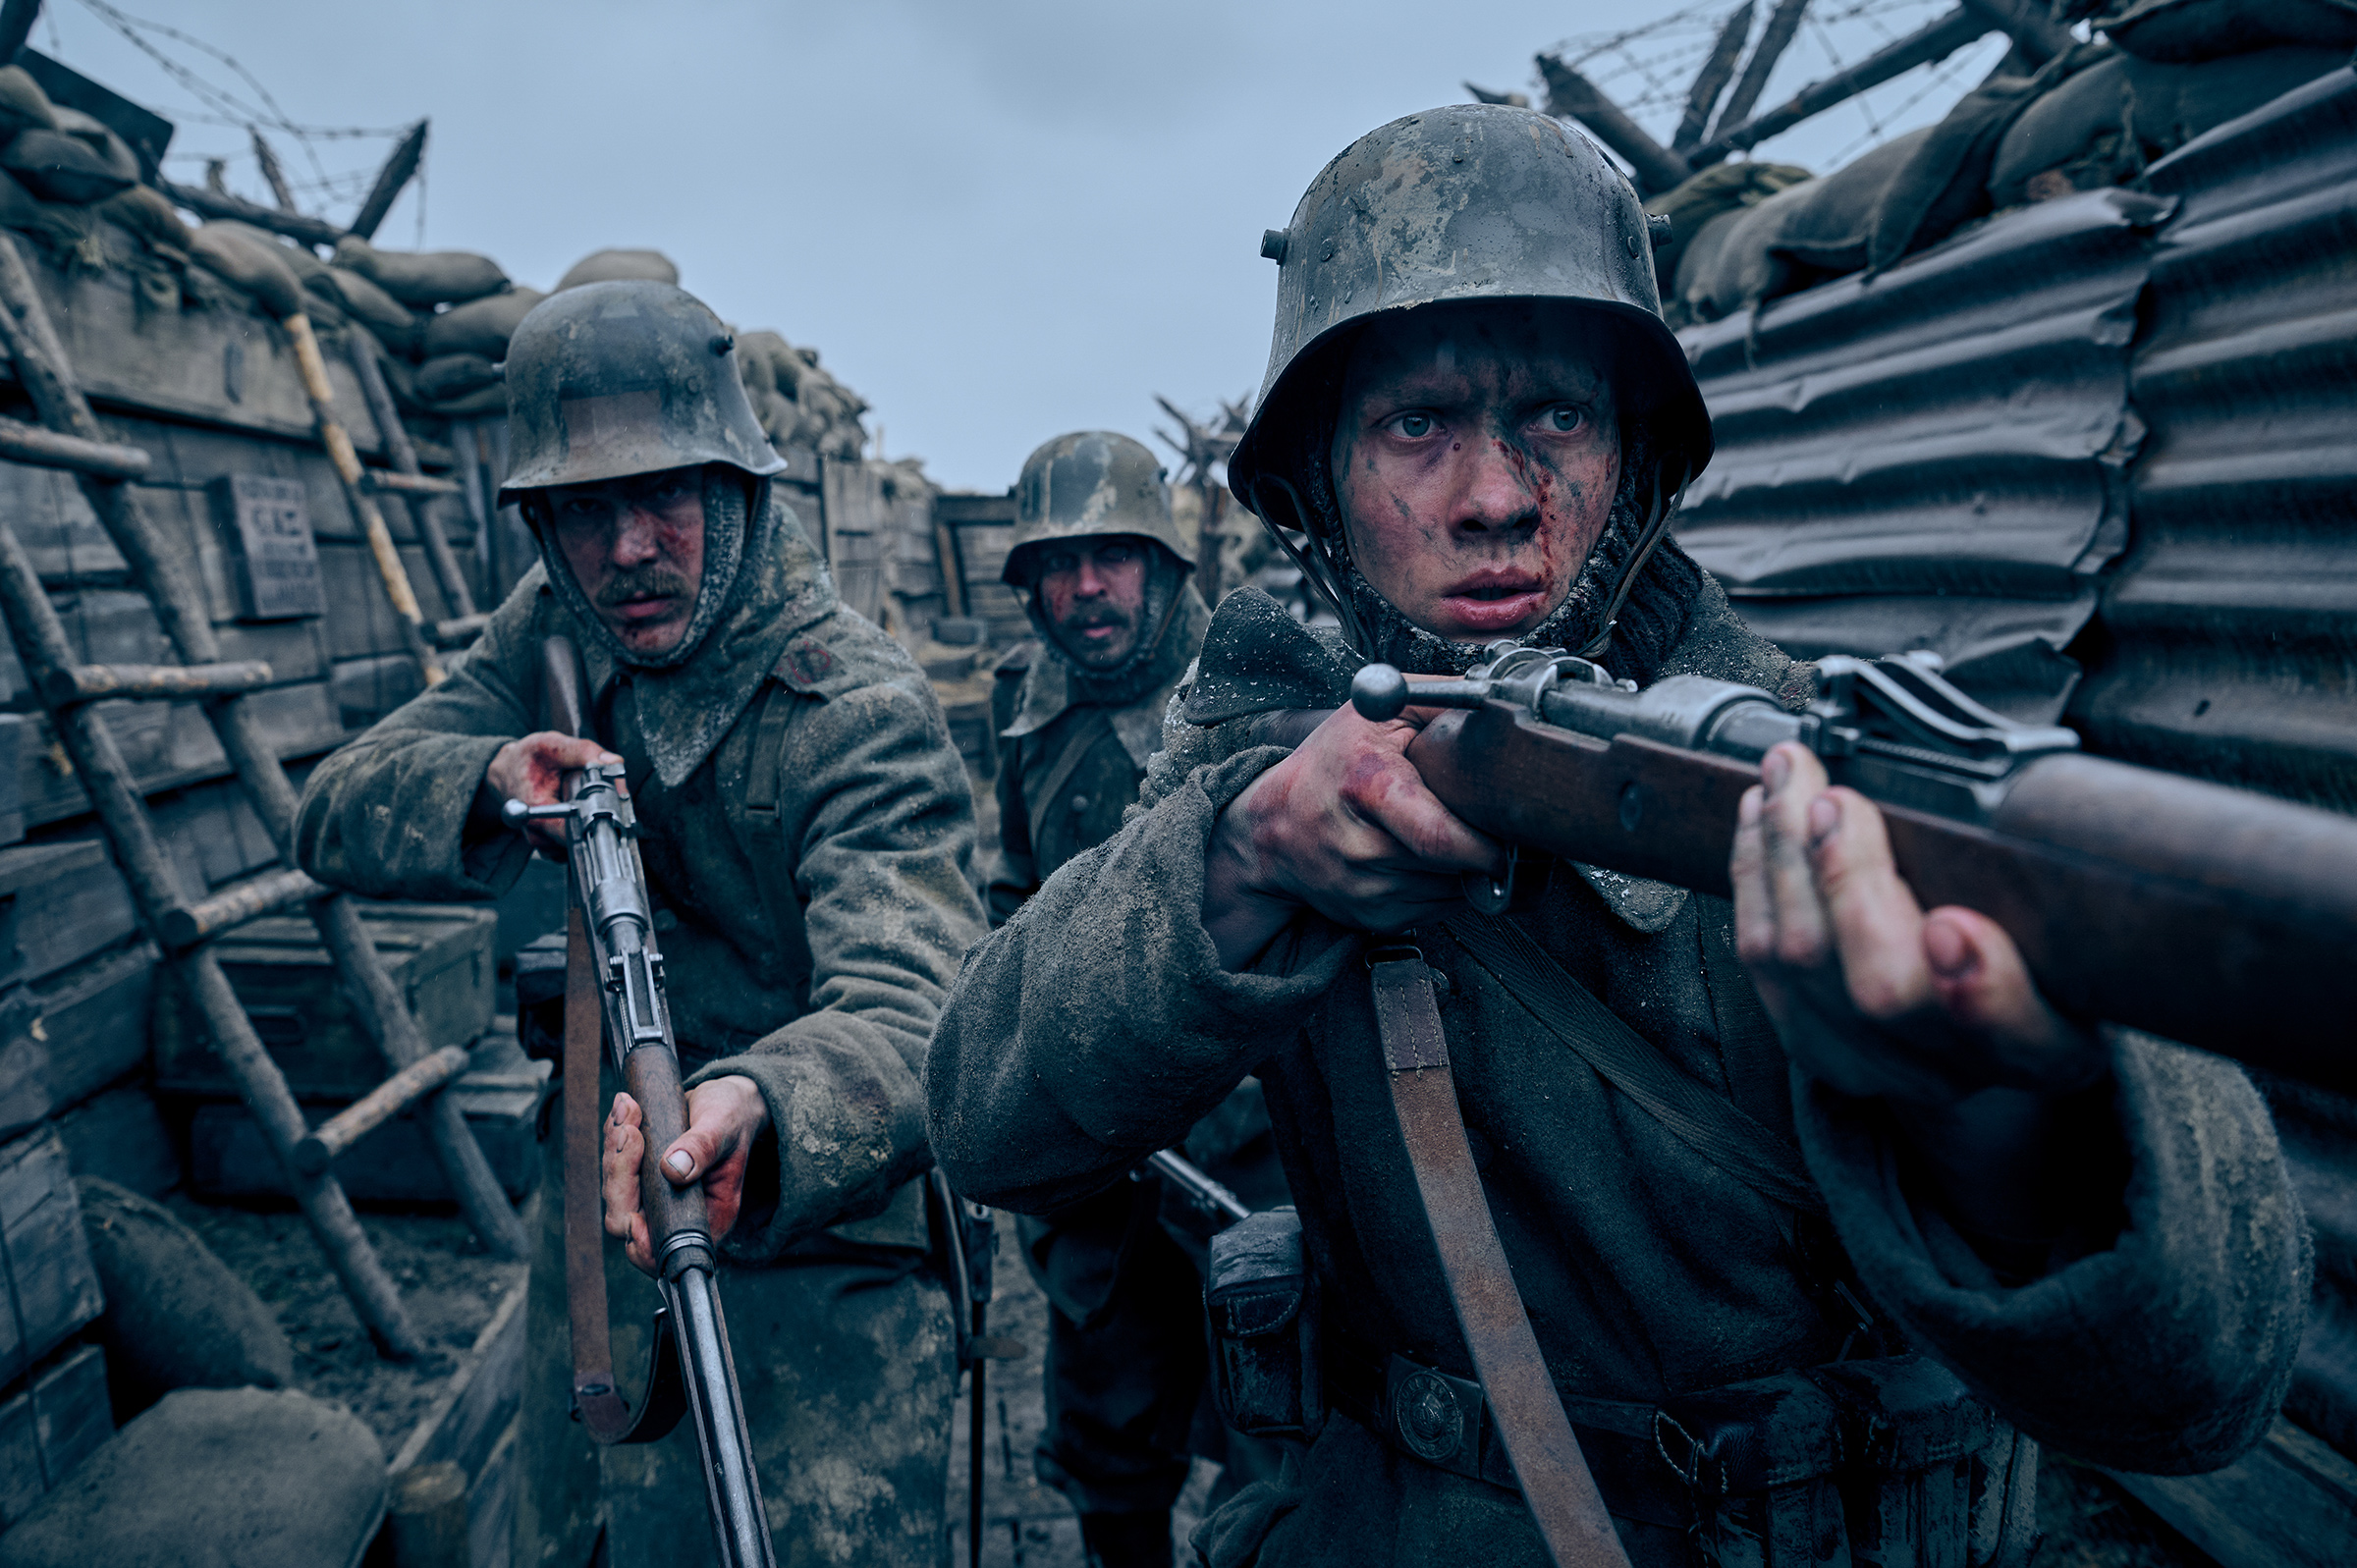 Here's everything about 'All Quiet on the Western Front' The movie